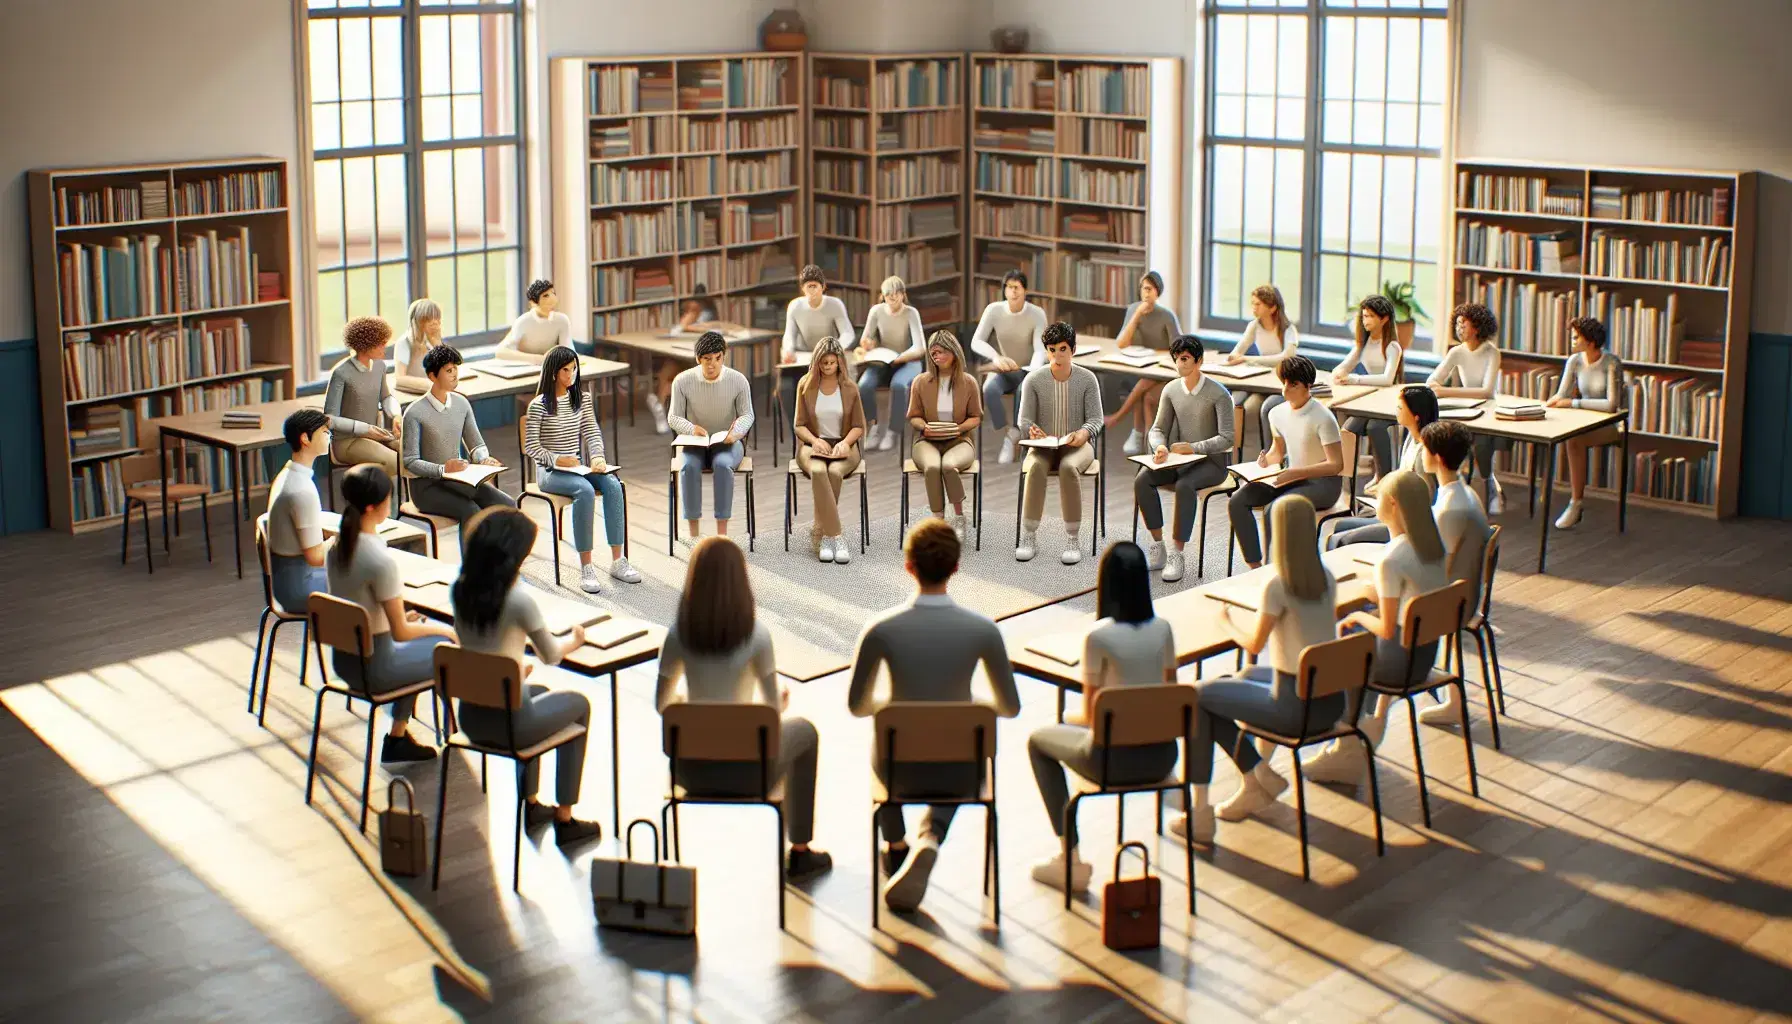 Students of various ages sitting in a semi-circle in the classroom while a teacher in the center facilitates a discussion, sunlit classroom with shelves of books.